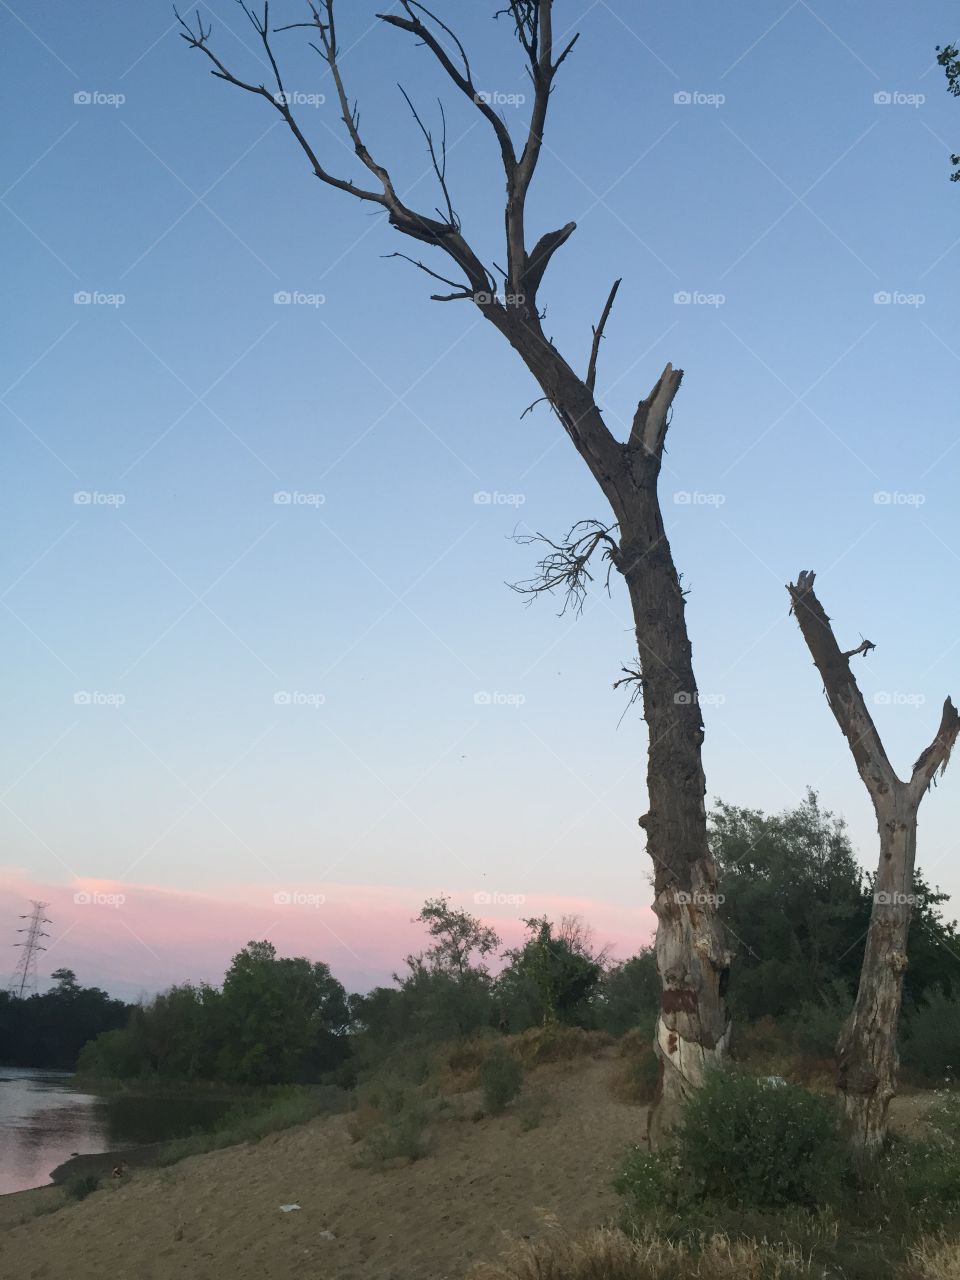 Favorite Trees in the Sunset. Sacramento River, Ca